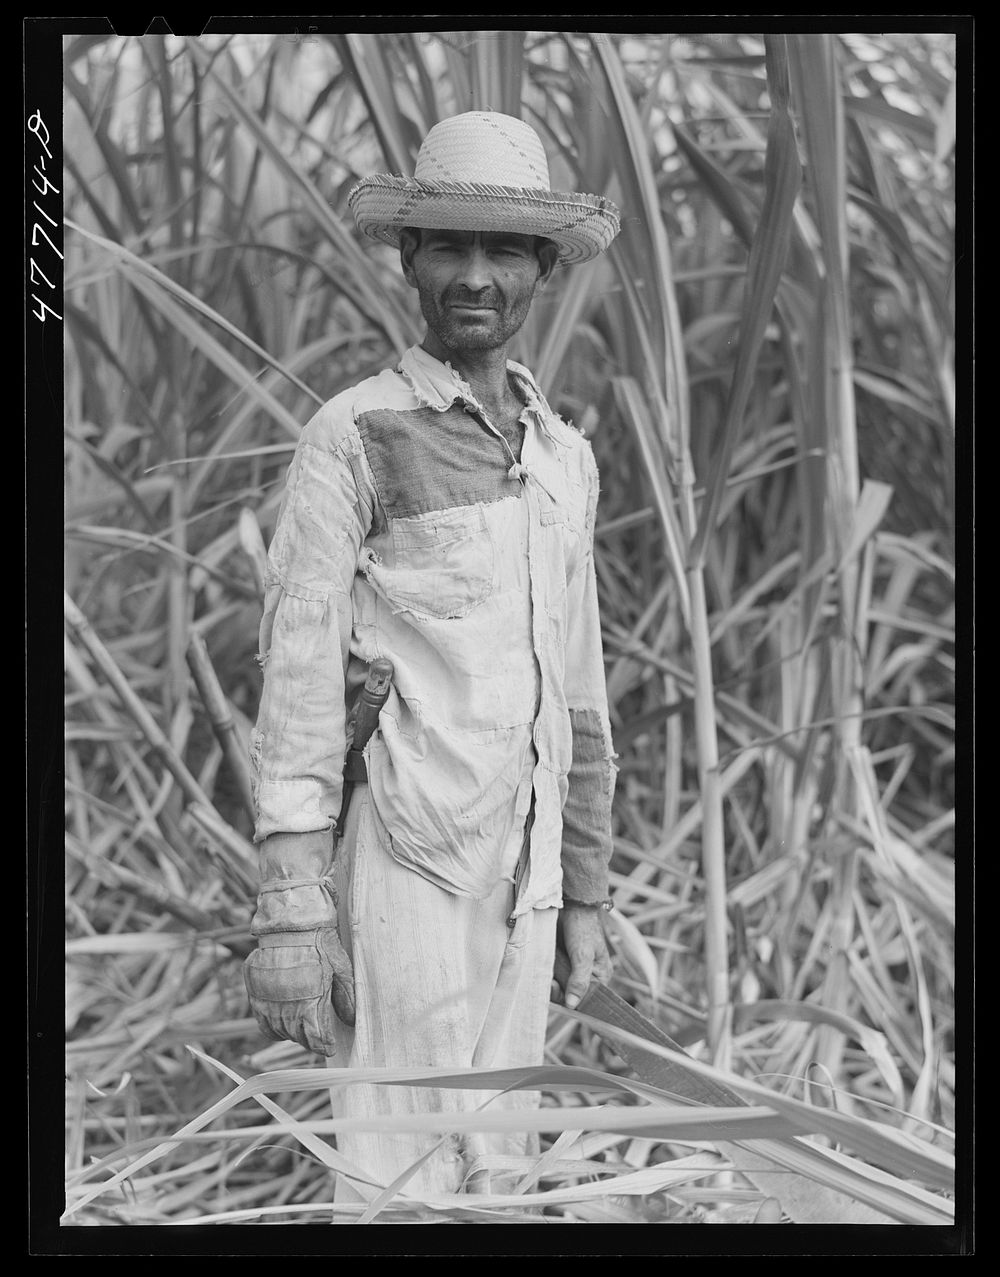 Yauco, Puerto Rico (vicinity). Farm laborer who was cutting sugar cane in a field. Sourced from the Library of Congress.